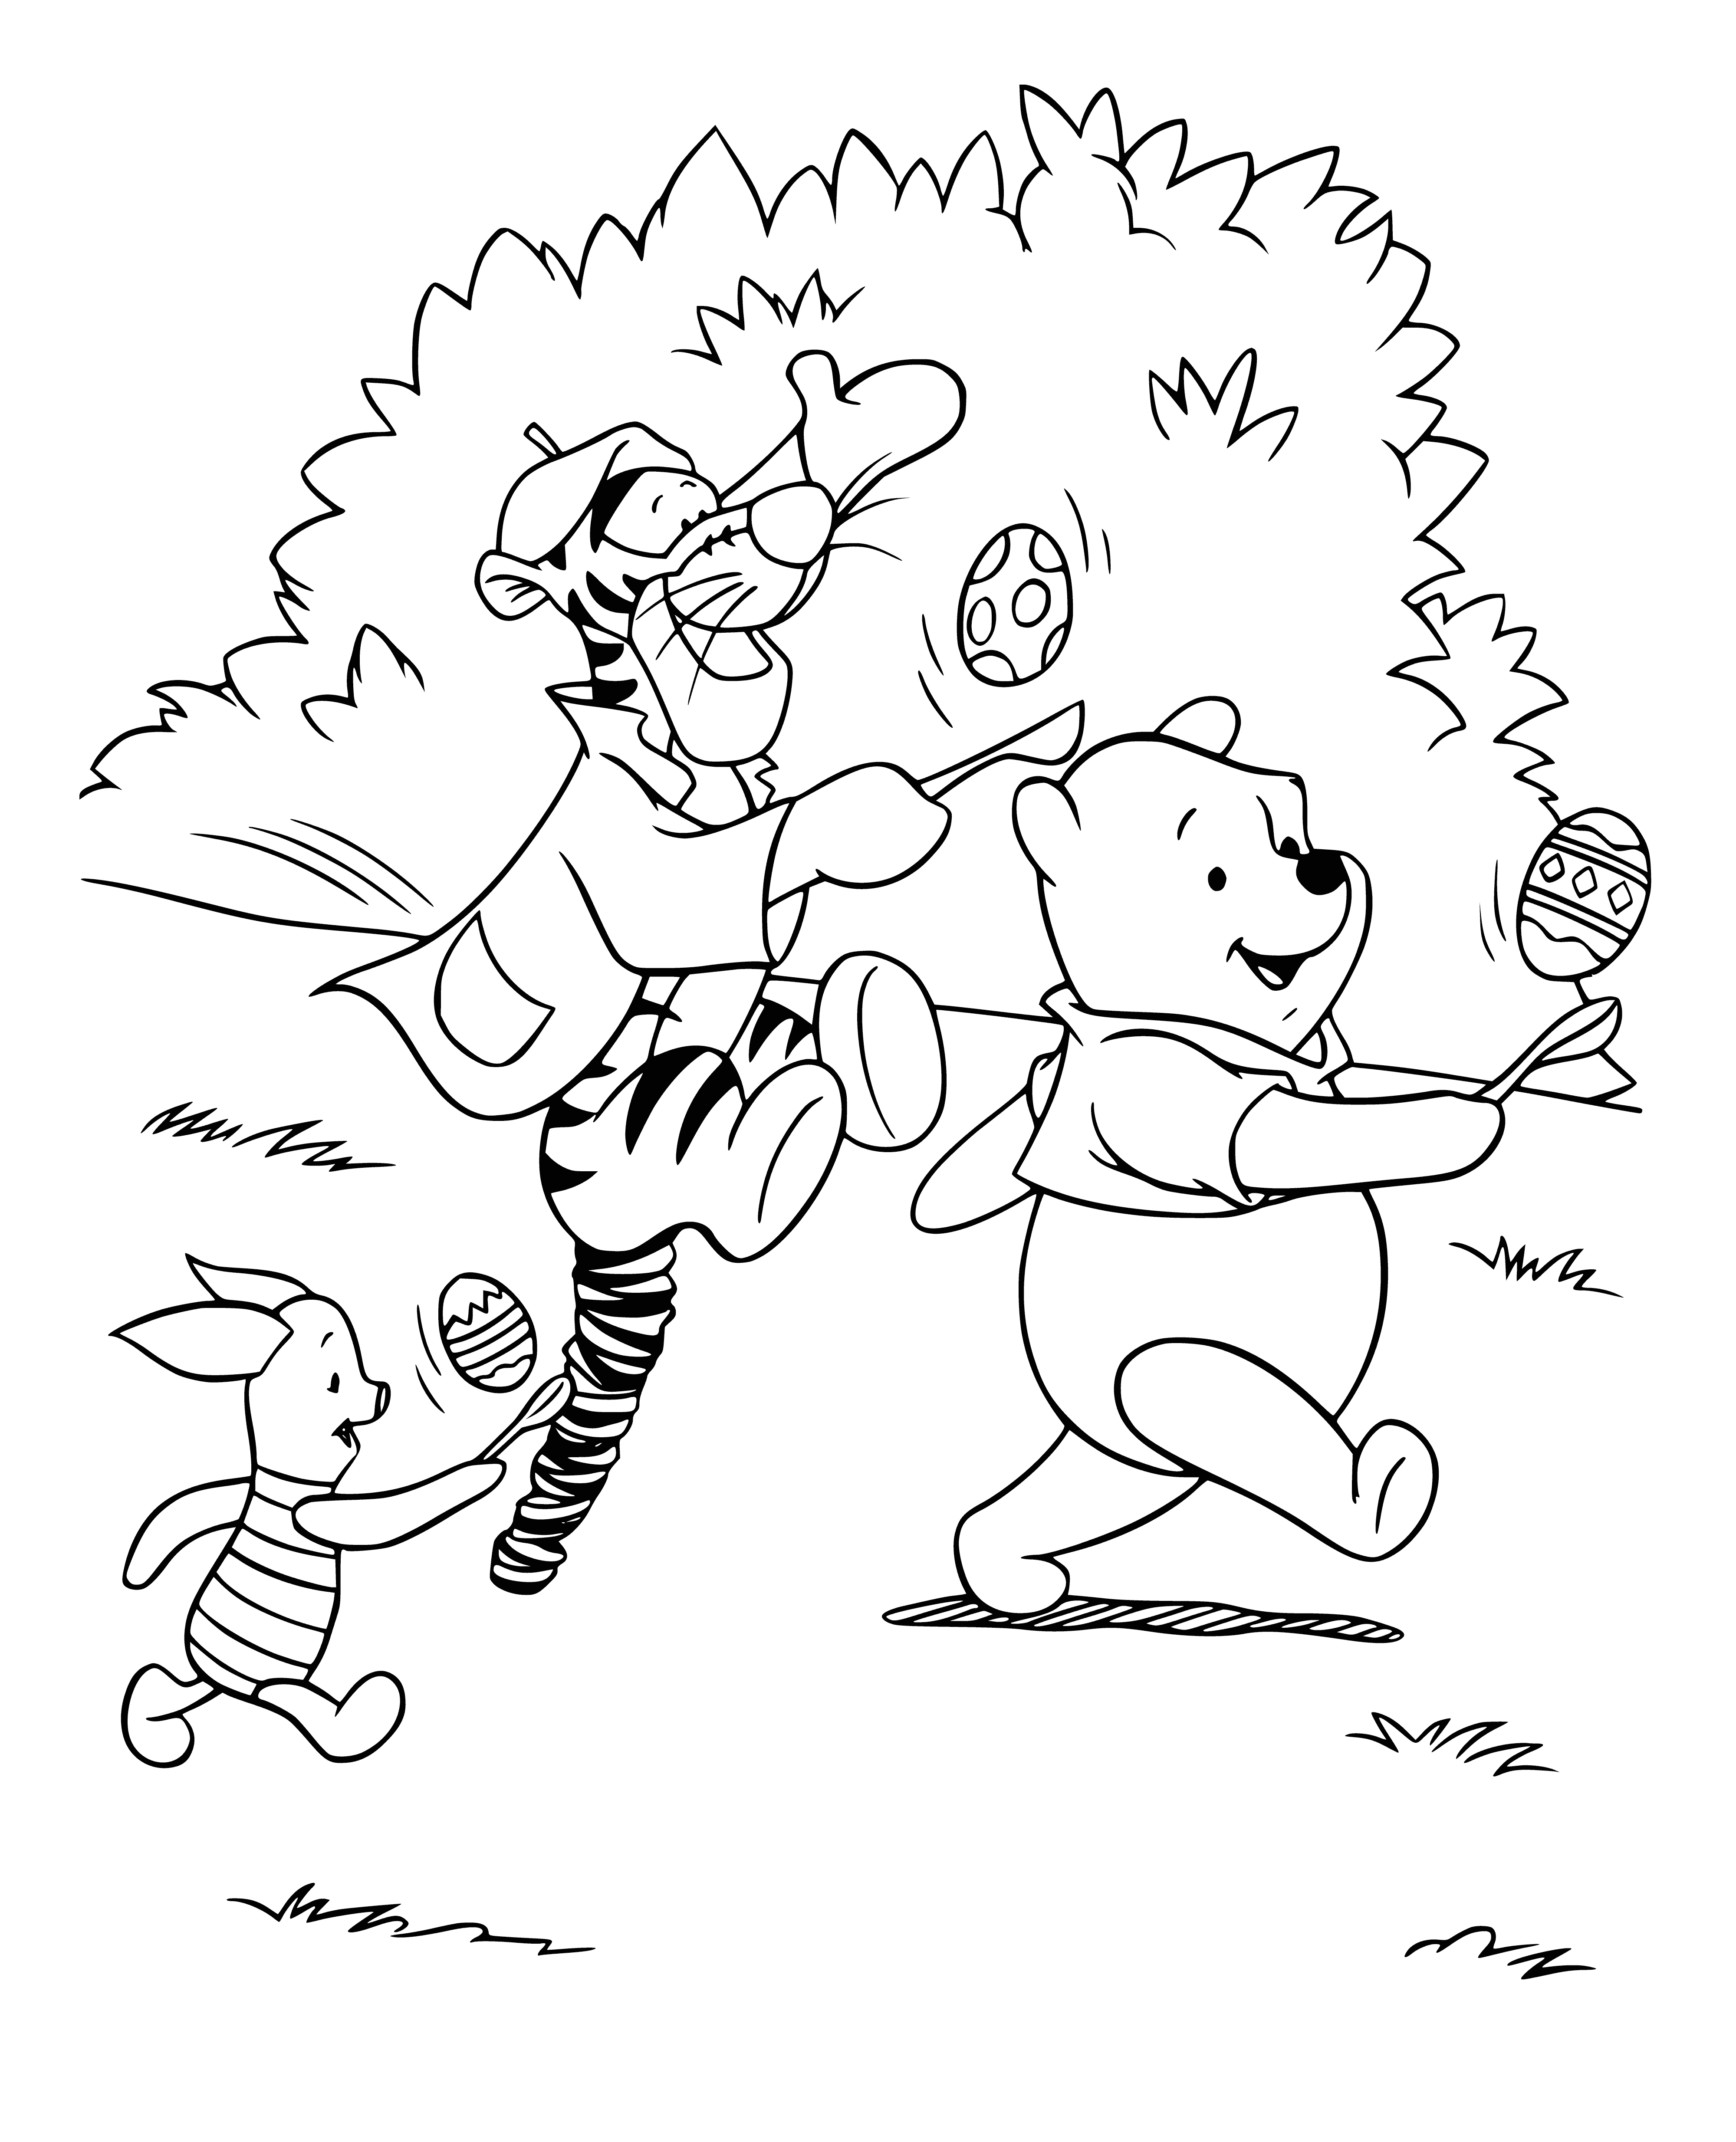 coloring page: Tigger, Piglet & Pooh in a field w/ Easter baskets & egg. Hill & trees in the bg. Grass is green, flowers blooming.